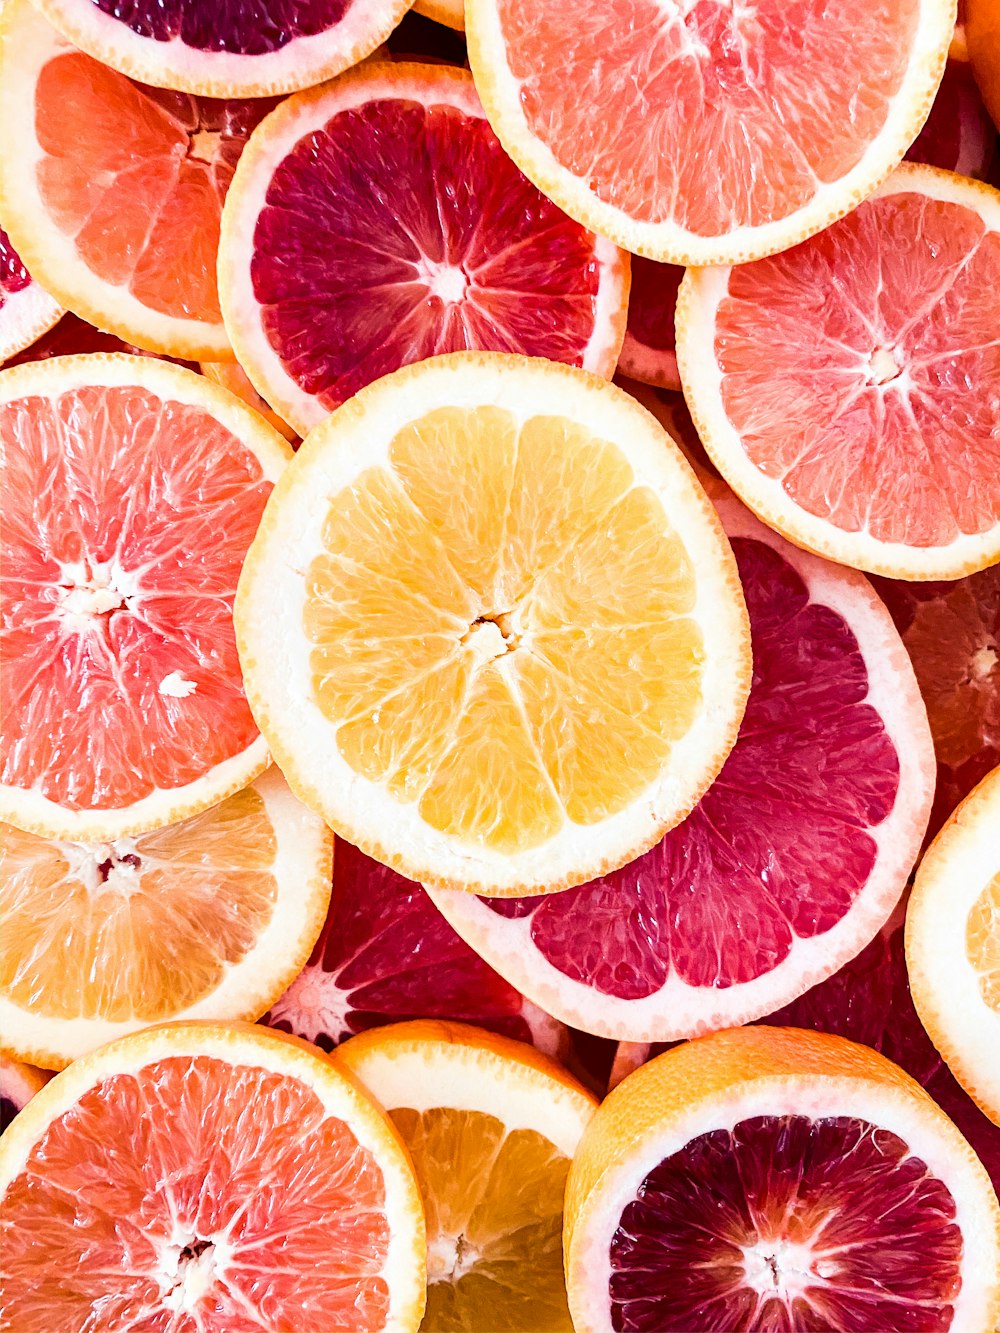 100 Fruits Pictures Download Free Images On Unsplash